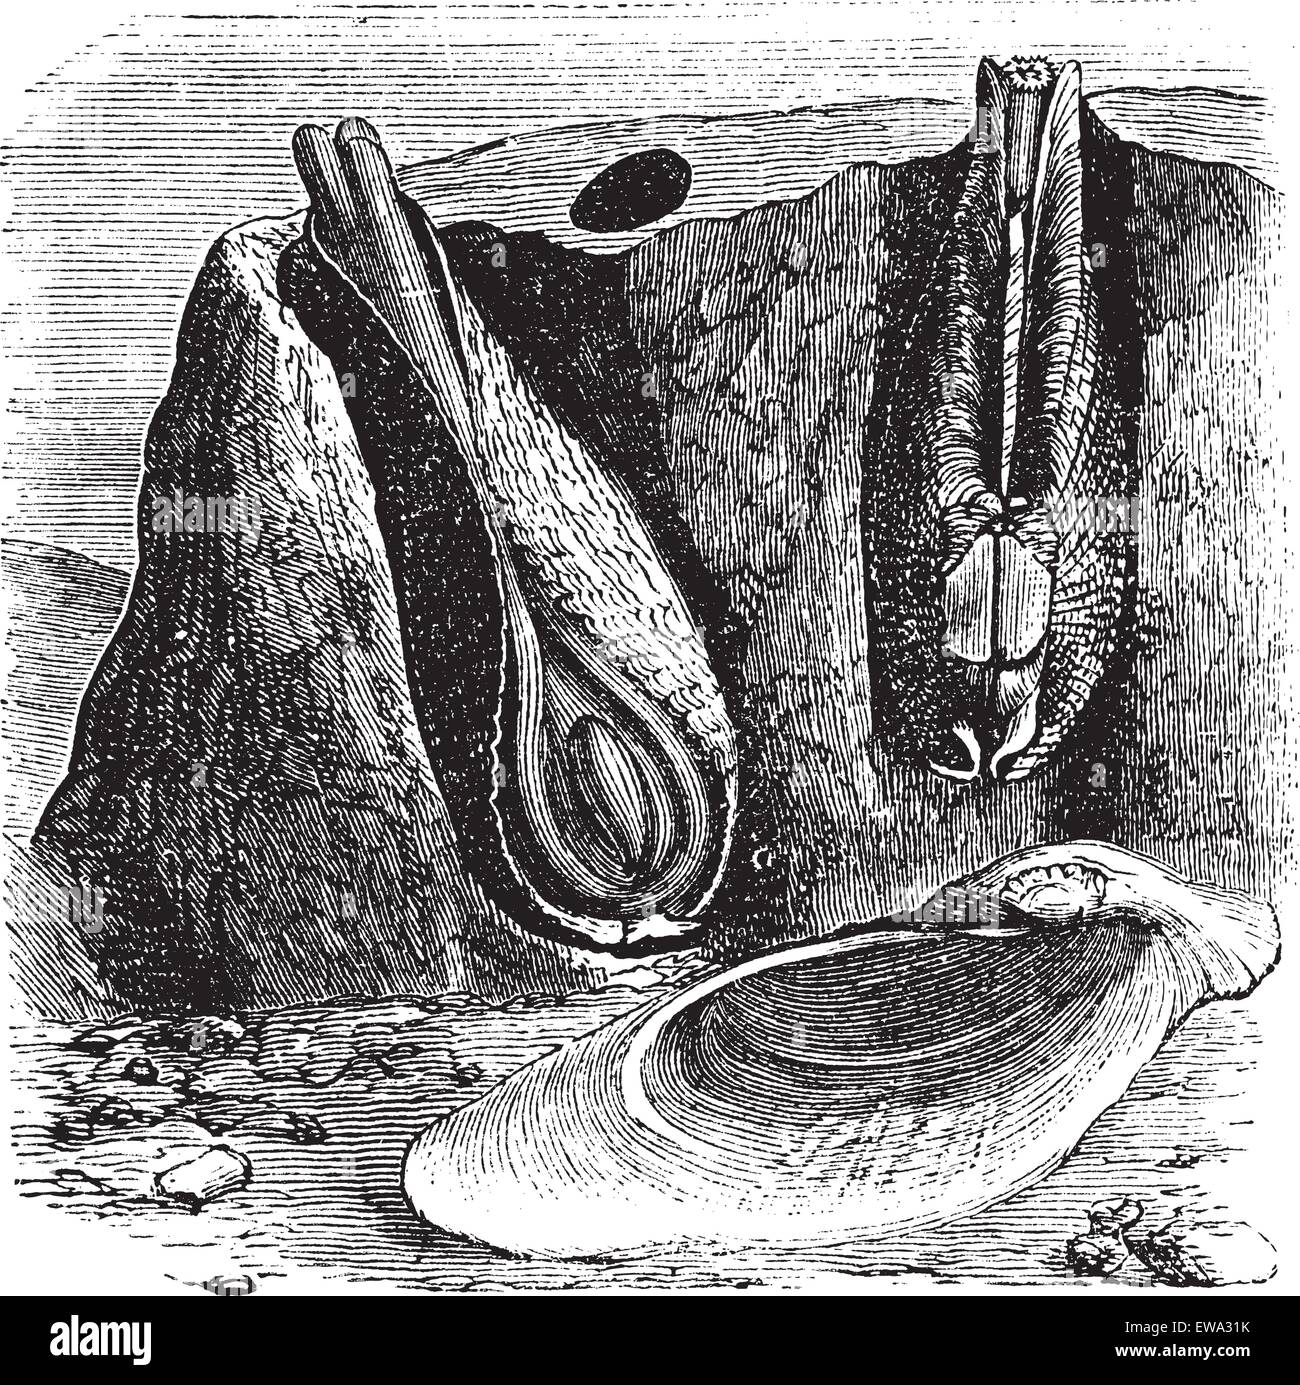 Common Piddock or Pholas dactylus or Stone Borer, vintage engraving. Old engraved illustration of Common Piddock in the Gneiss. Stock Vector